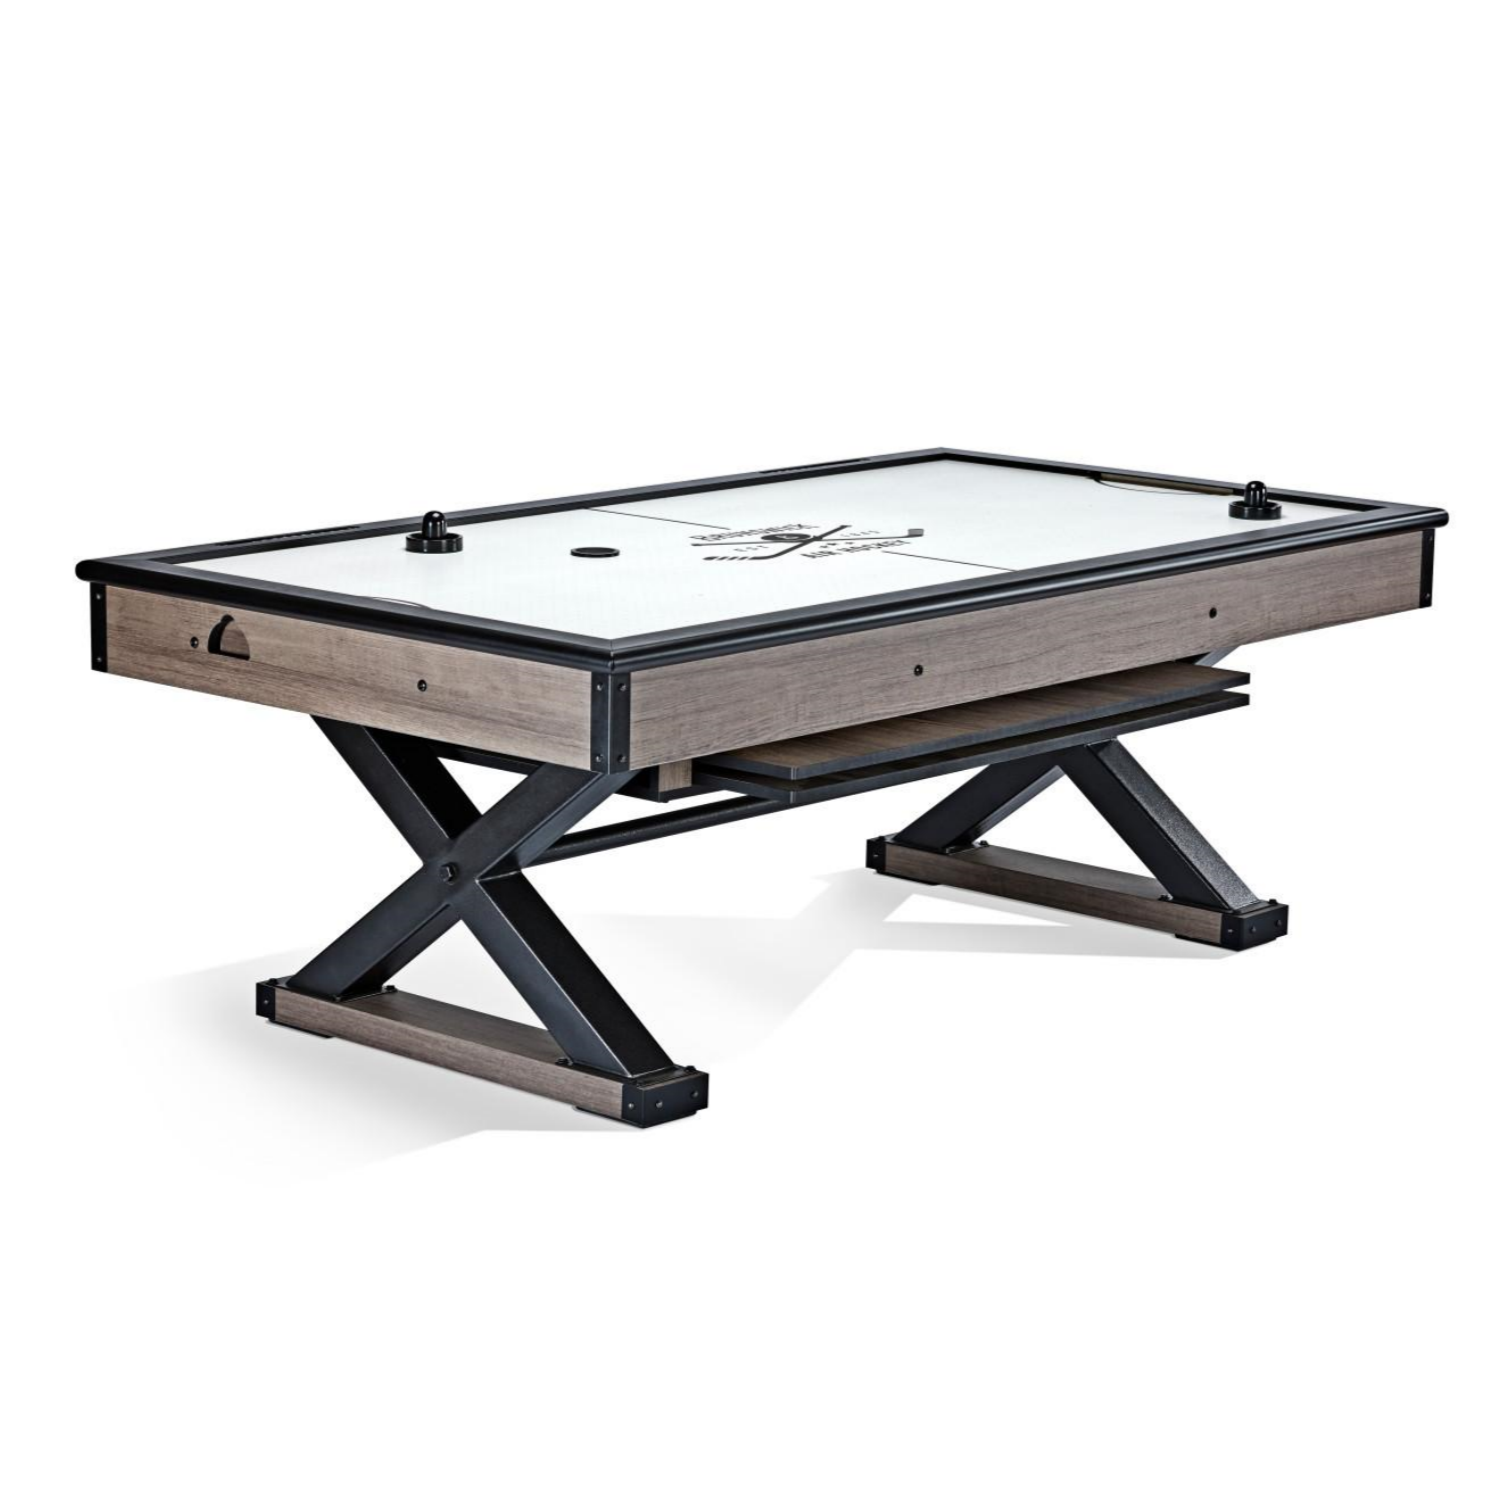 2IN1 Dining Air Hockey Table-Premium Quality